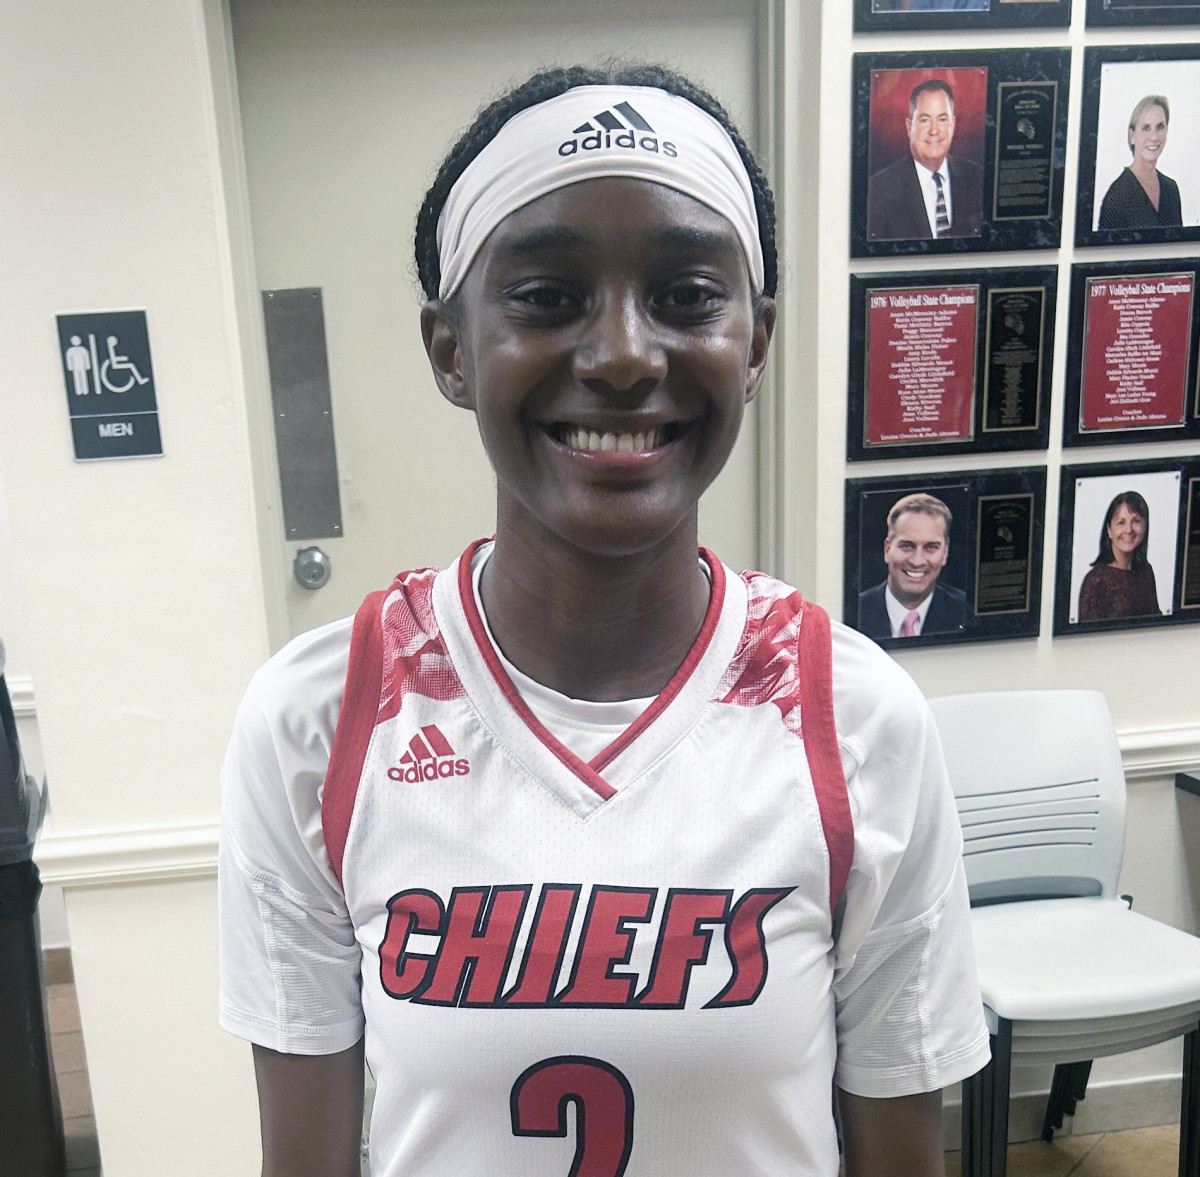 Taylor Williams scored 21 points in Cardinal Gibbons victory over Coral Springs Charter, including 14 in the second half when the Chiefs broke the game open.